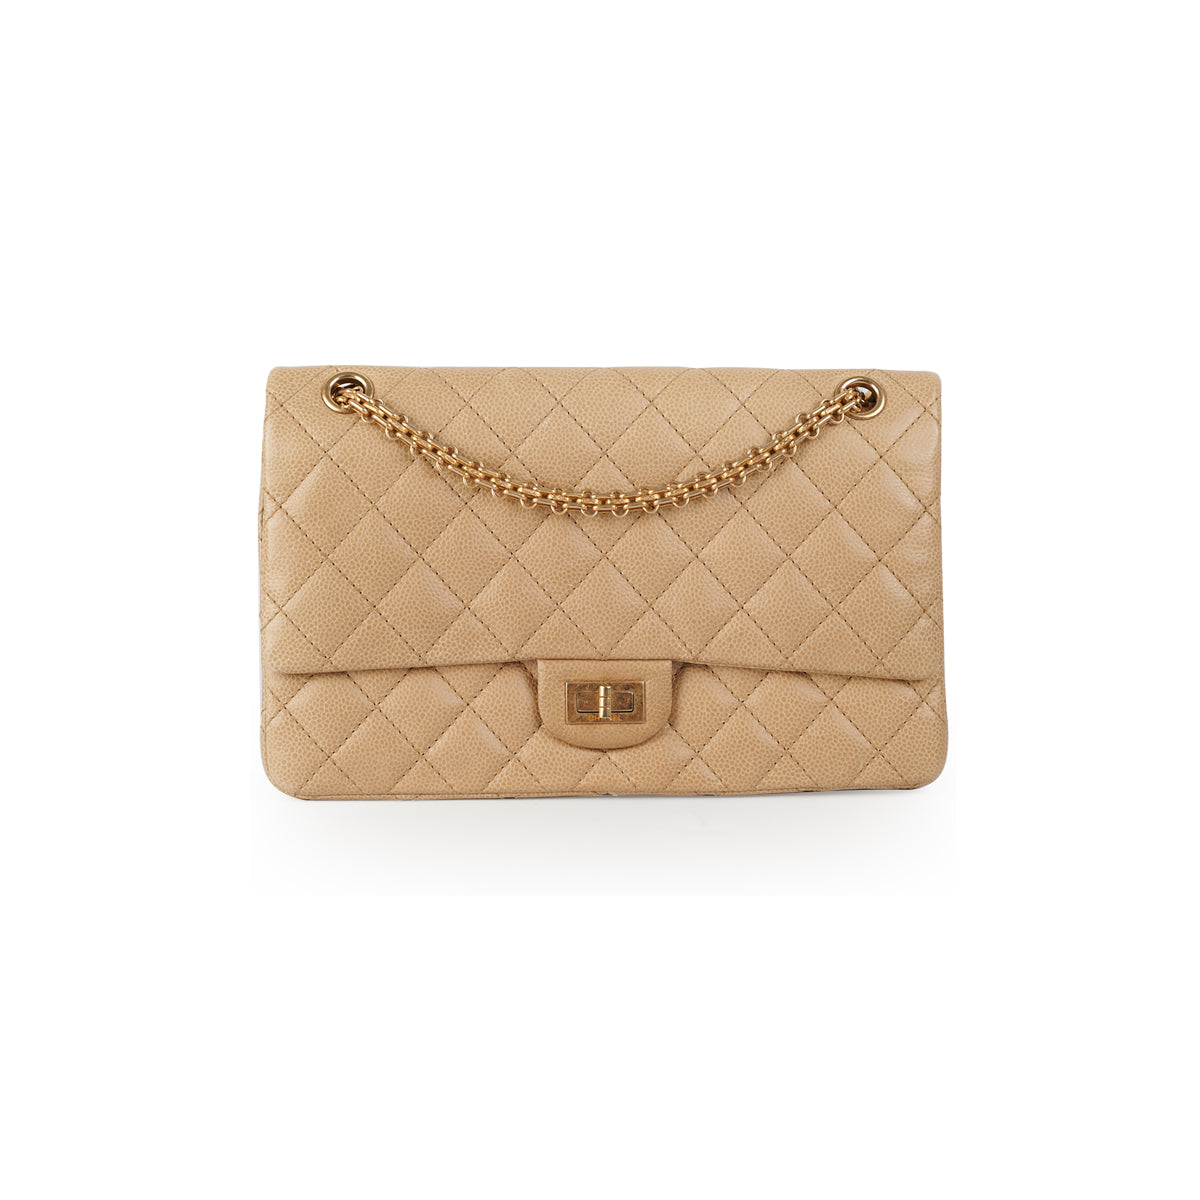 Chanel Reissue 225 Beige Calfskin Leather Antique Gold Hardware Preowned  in Dustbag  Julia Rose Boston  Shop